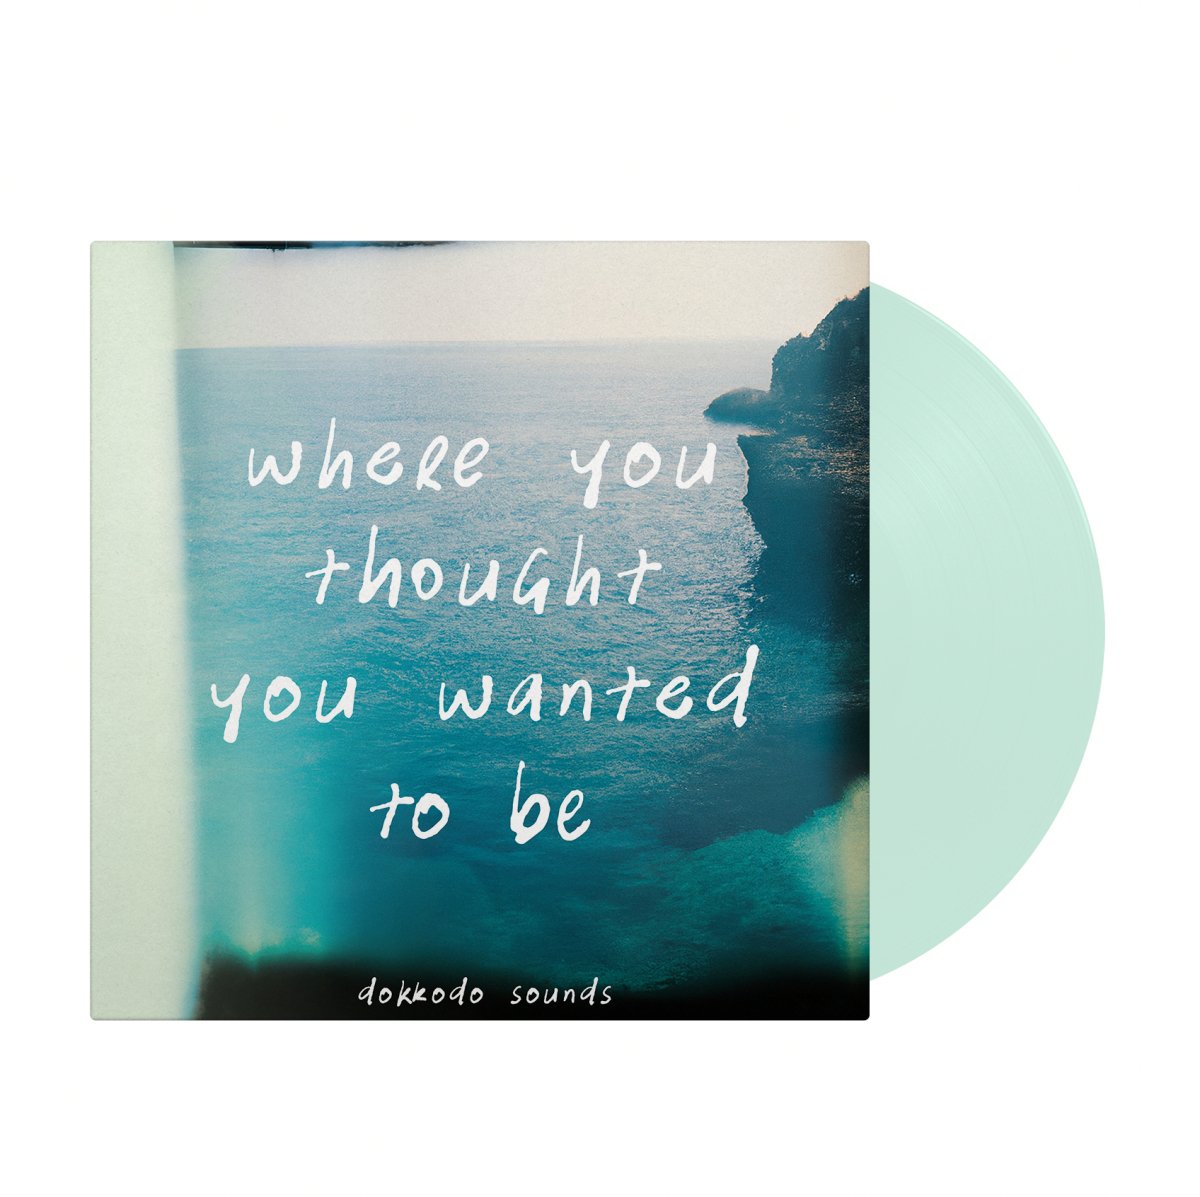 Dokkodo Sounds - Where You Thought You Wanted To Be - Inner Ocean Records